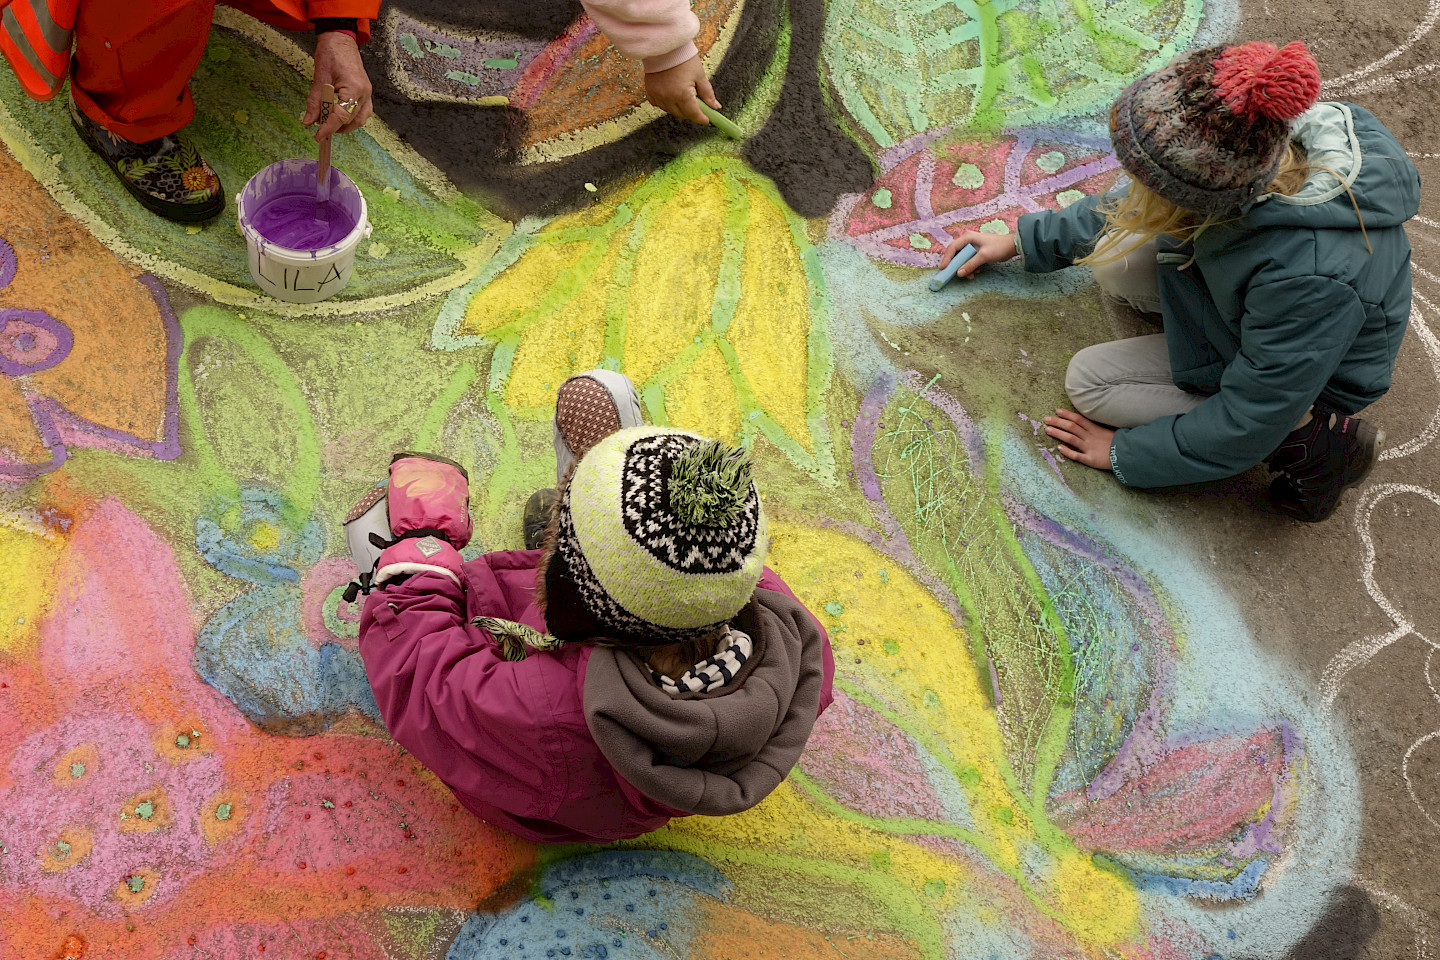 Children sit on the floor and paint flower pictures with chalk.